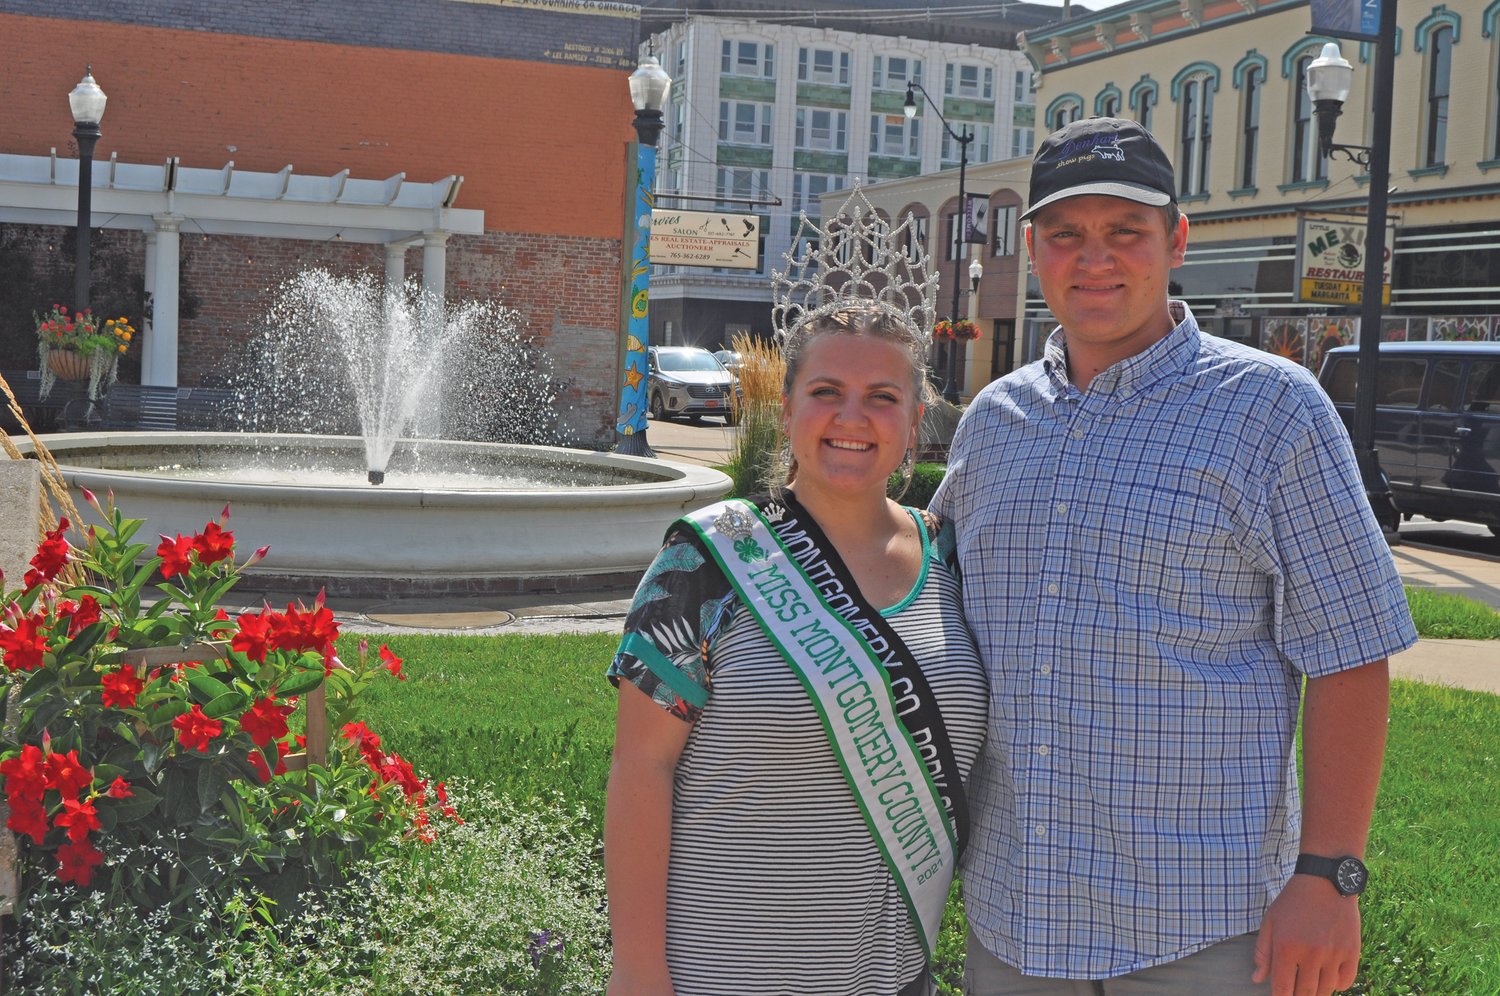 Twin siblings Morgan, left, and Colton Meadows at Marie Canine Plaza in downtown Crawfordsville. Morgan is the reigning Miss Montgomery County and Colton was named Supreme Showman at this year’s 4-H fair.